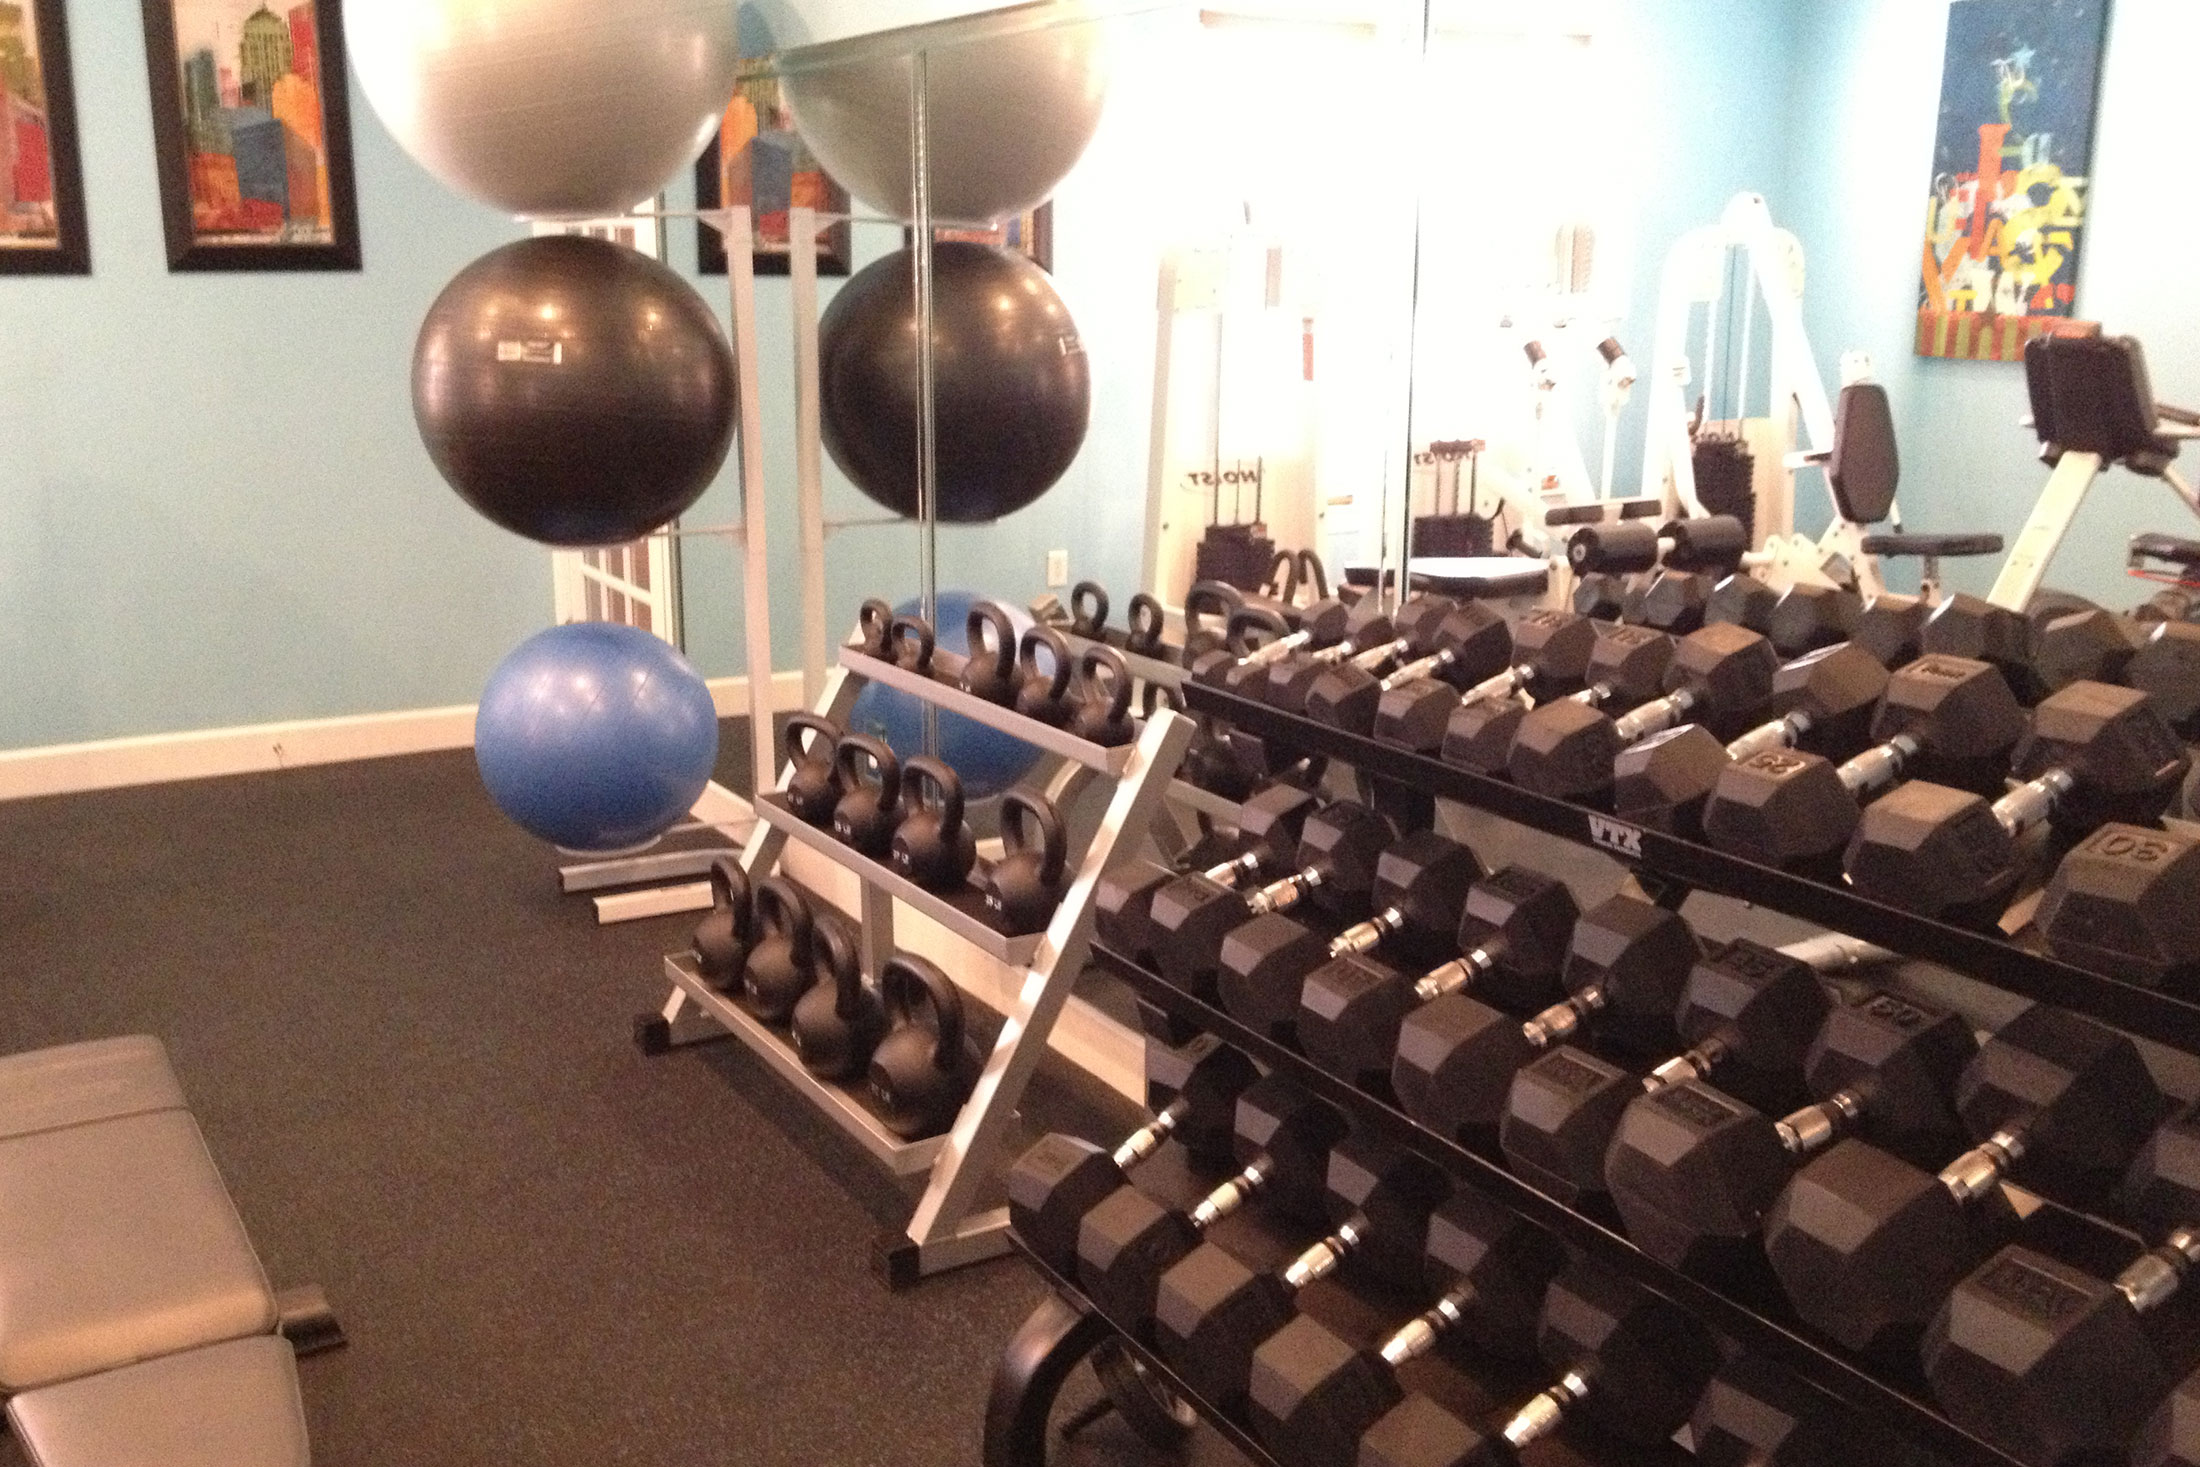 Fitness center with large rack of dumbbells, kettle bells, and exercise balls.